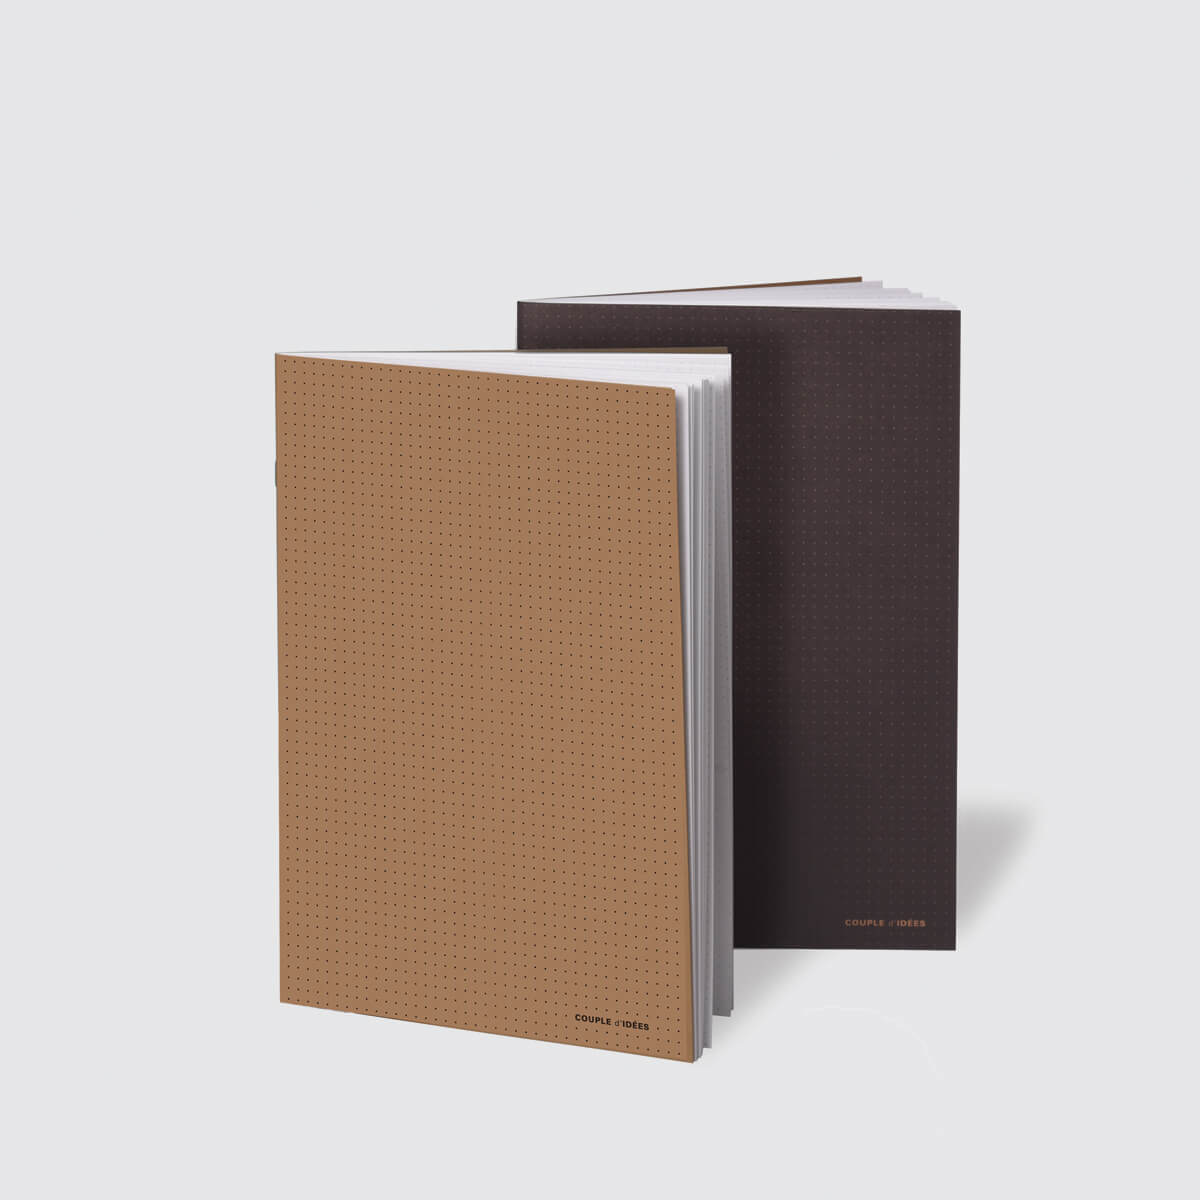 Couple d'idees Large WORKSHOP notebook